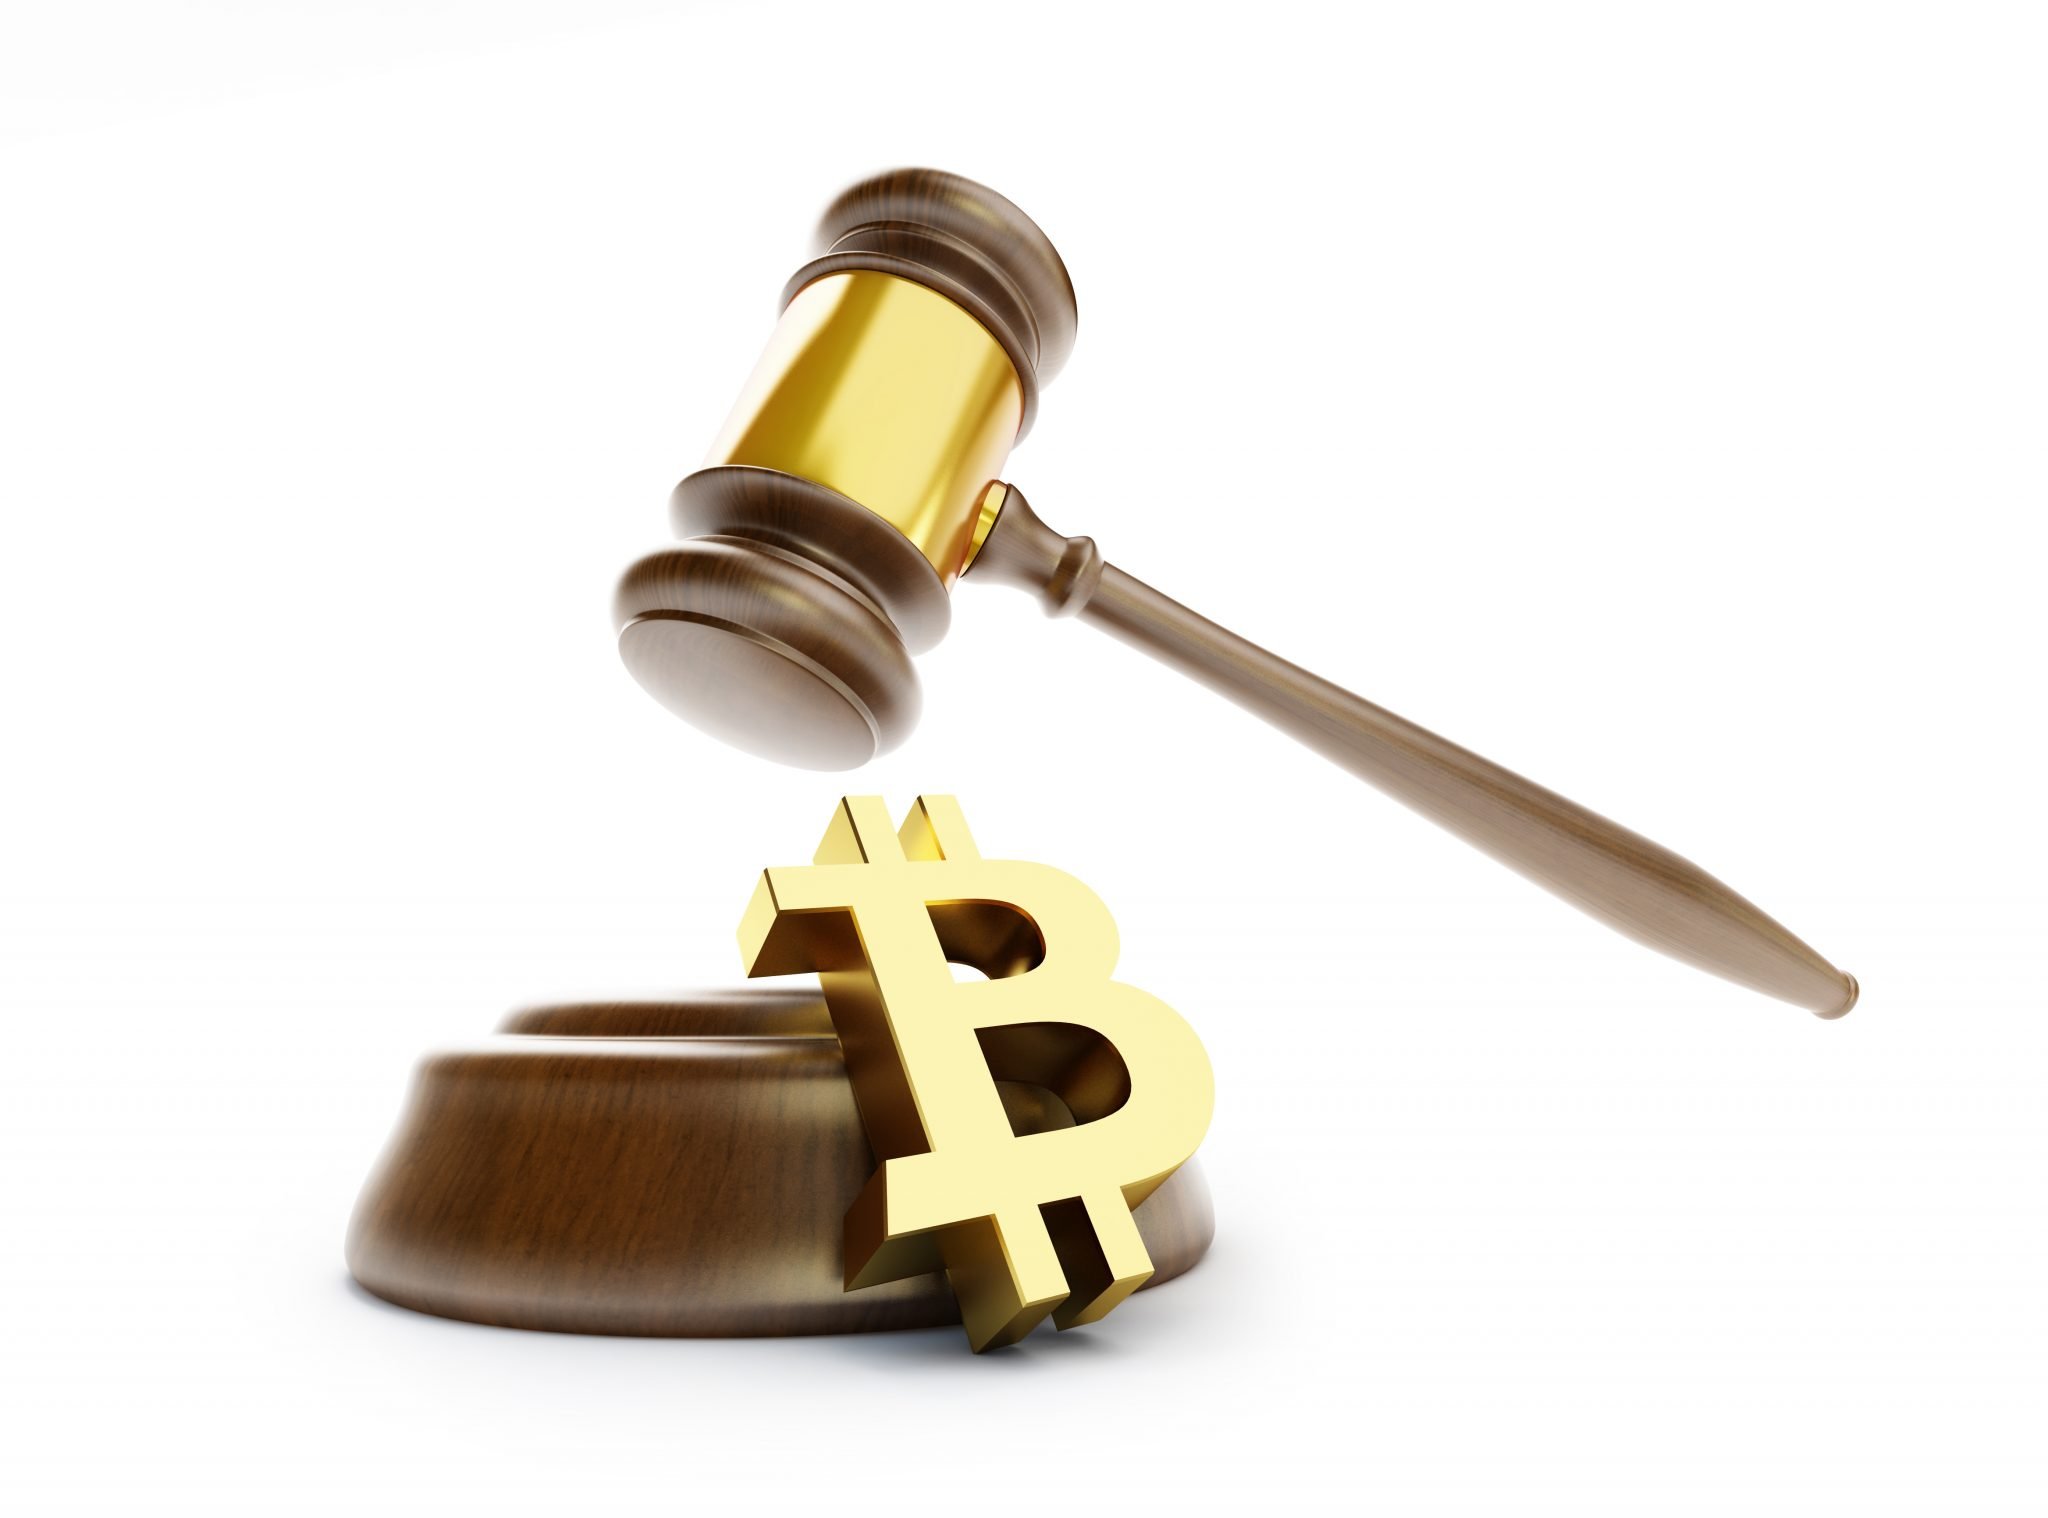 law bitcoin  on a white background 3D illustration, 3D rendering